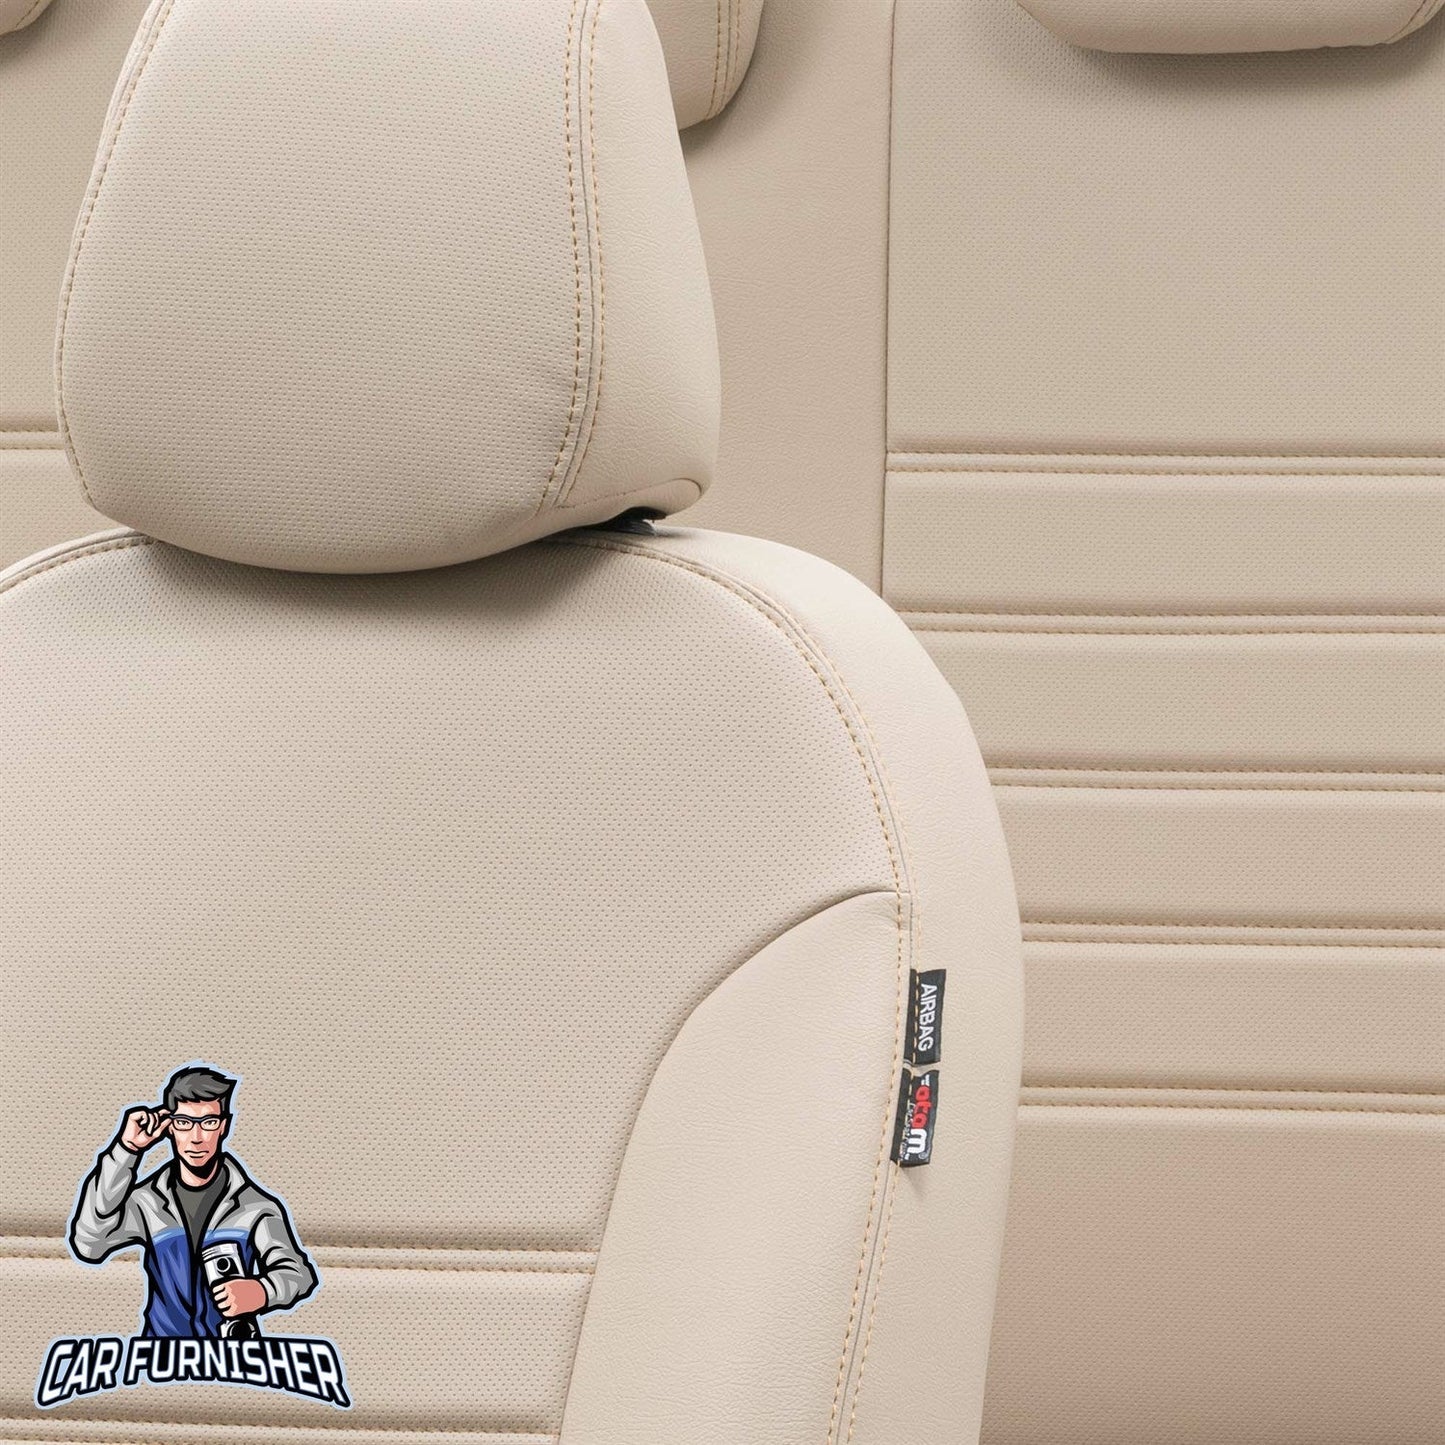 Honda HRV Seat Covers Istanbul Leather Design Beige Leather